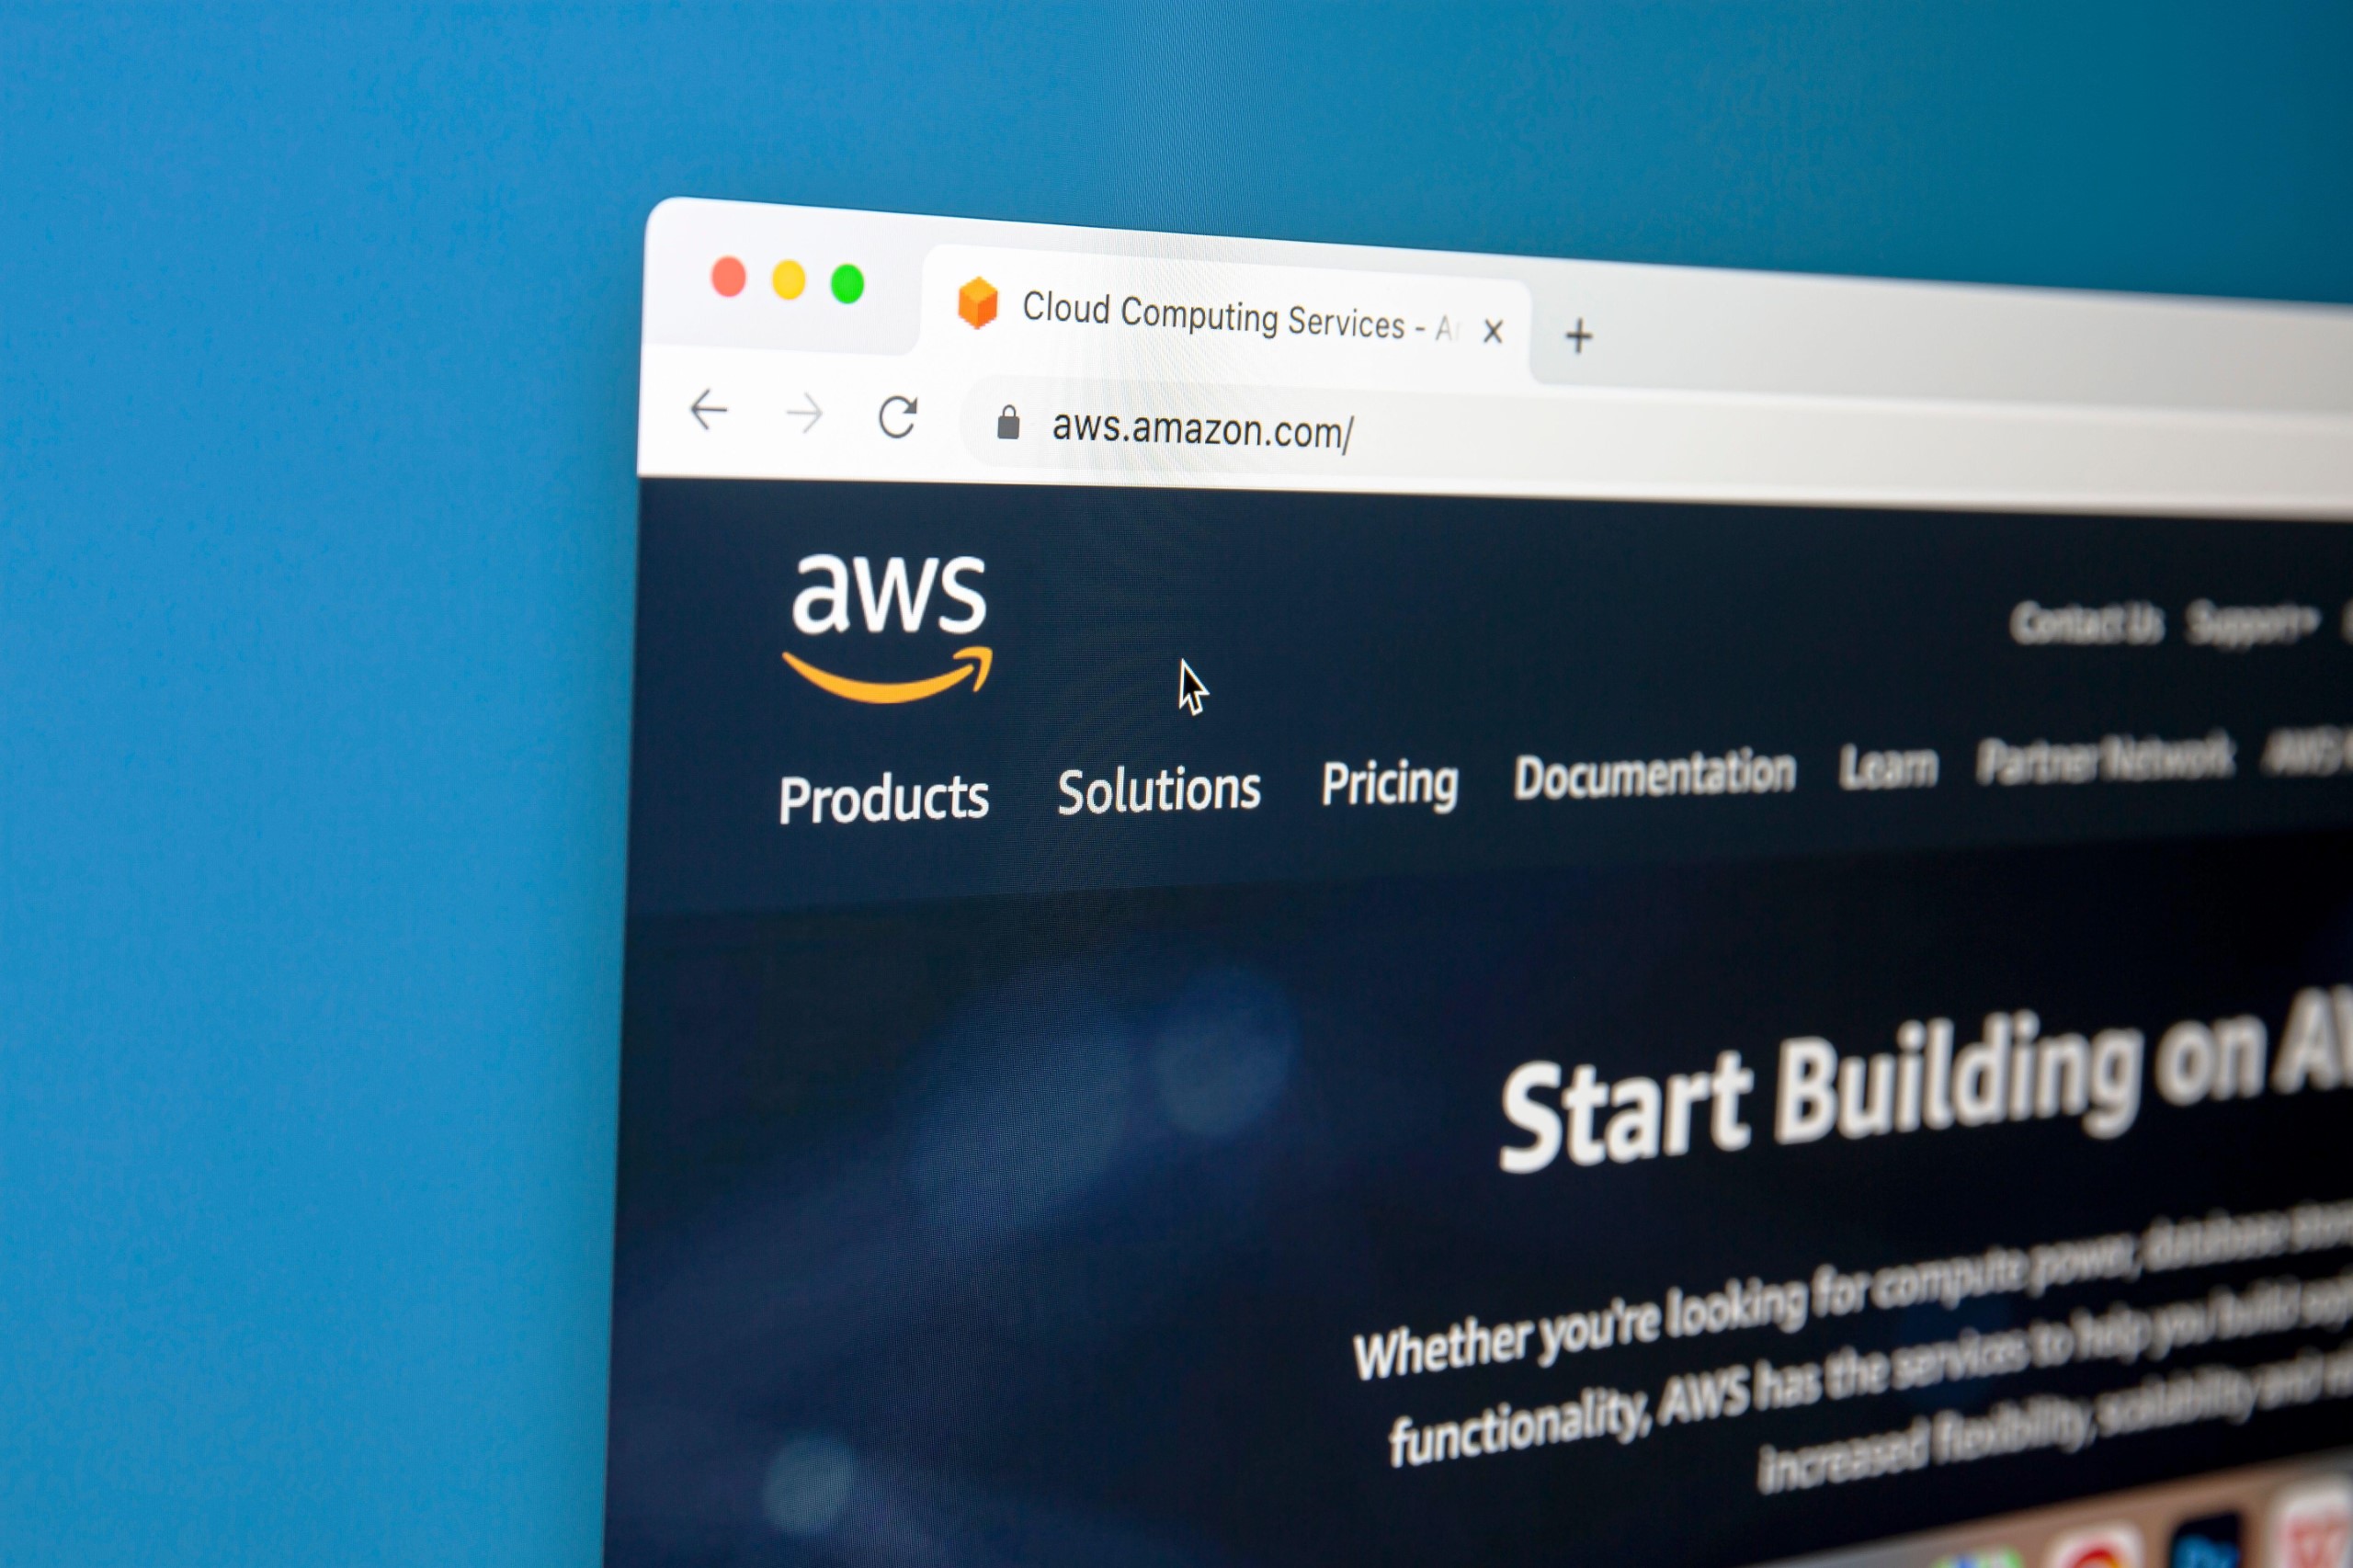 Amazon Earnings Preview: AWS May Join Azure in Reporting Slower Growth | Data Center Knowledge | News and analysis for the data center industry